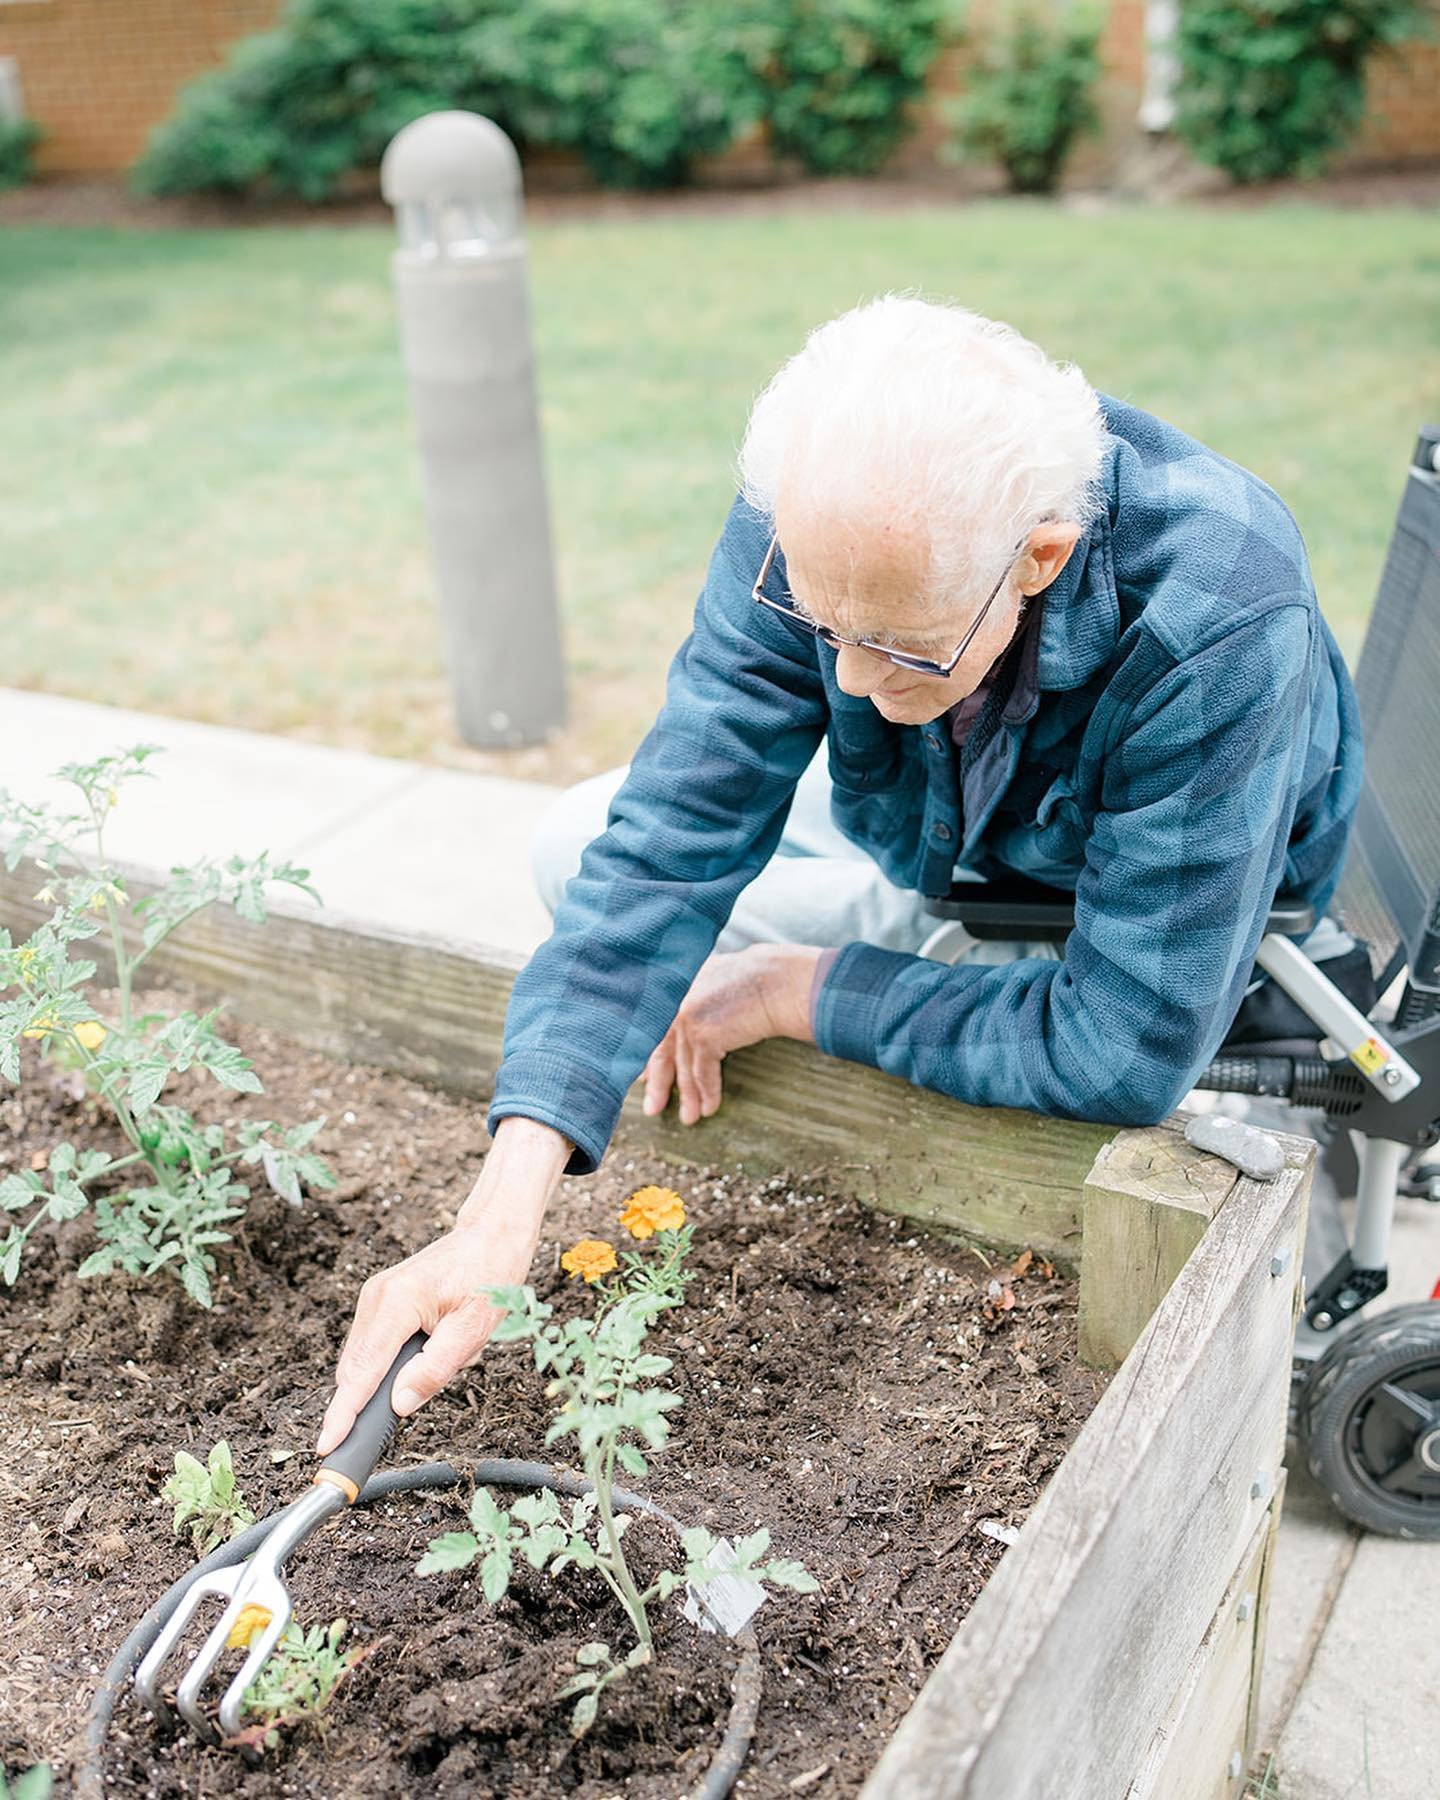 🌸 Got that Spring itch? Us too! 🌸

At Dunlop House, we have a raised bed vegetable and flower garden that our residents love to tend and we&rsquo;re on the lookout for passionate volunteers to help us launch our Spring garden this season.

If you h